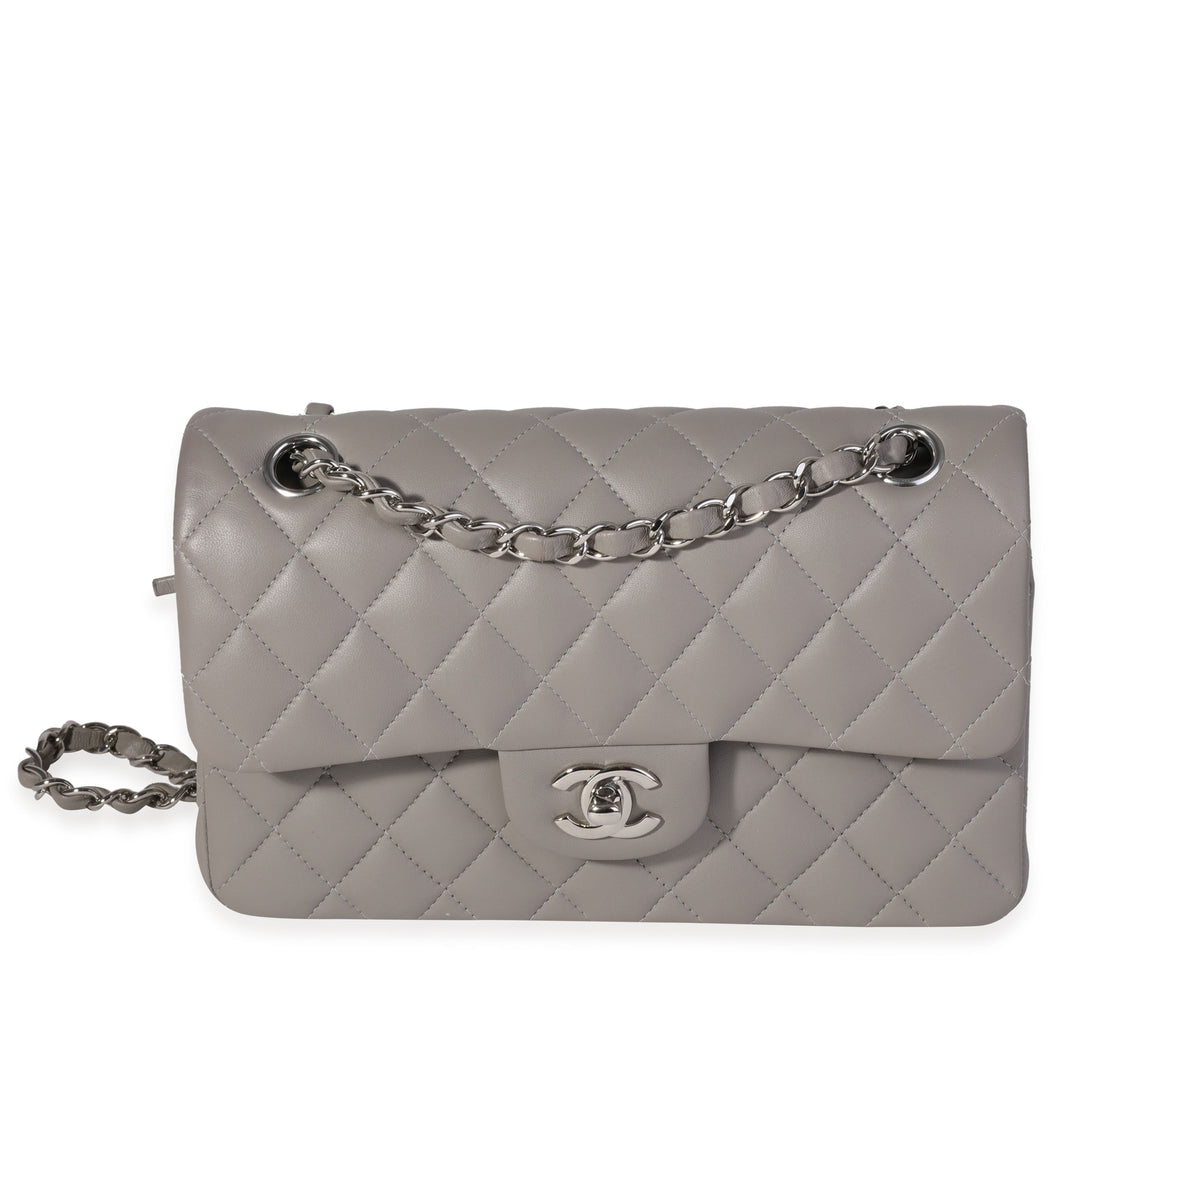 Chanel Grey Quilted Lambskin Small Classic Double Flap Bag, myGemma, DE